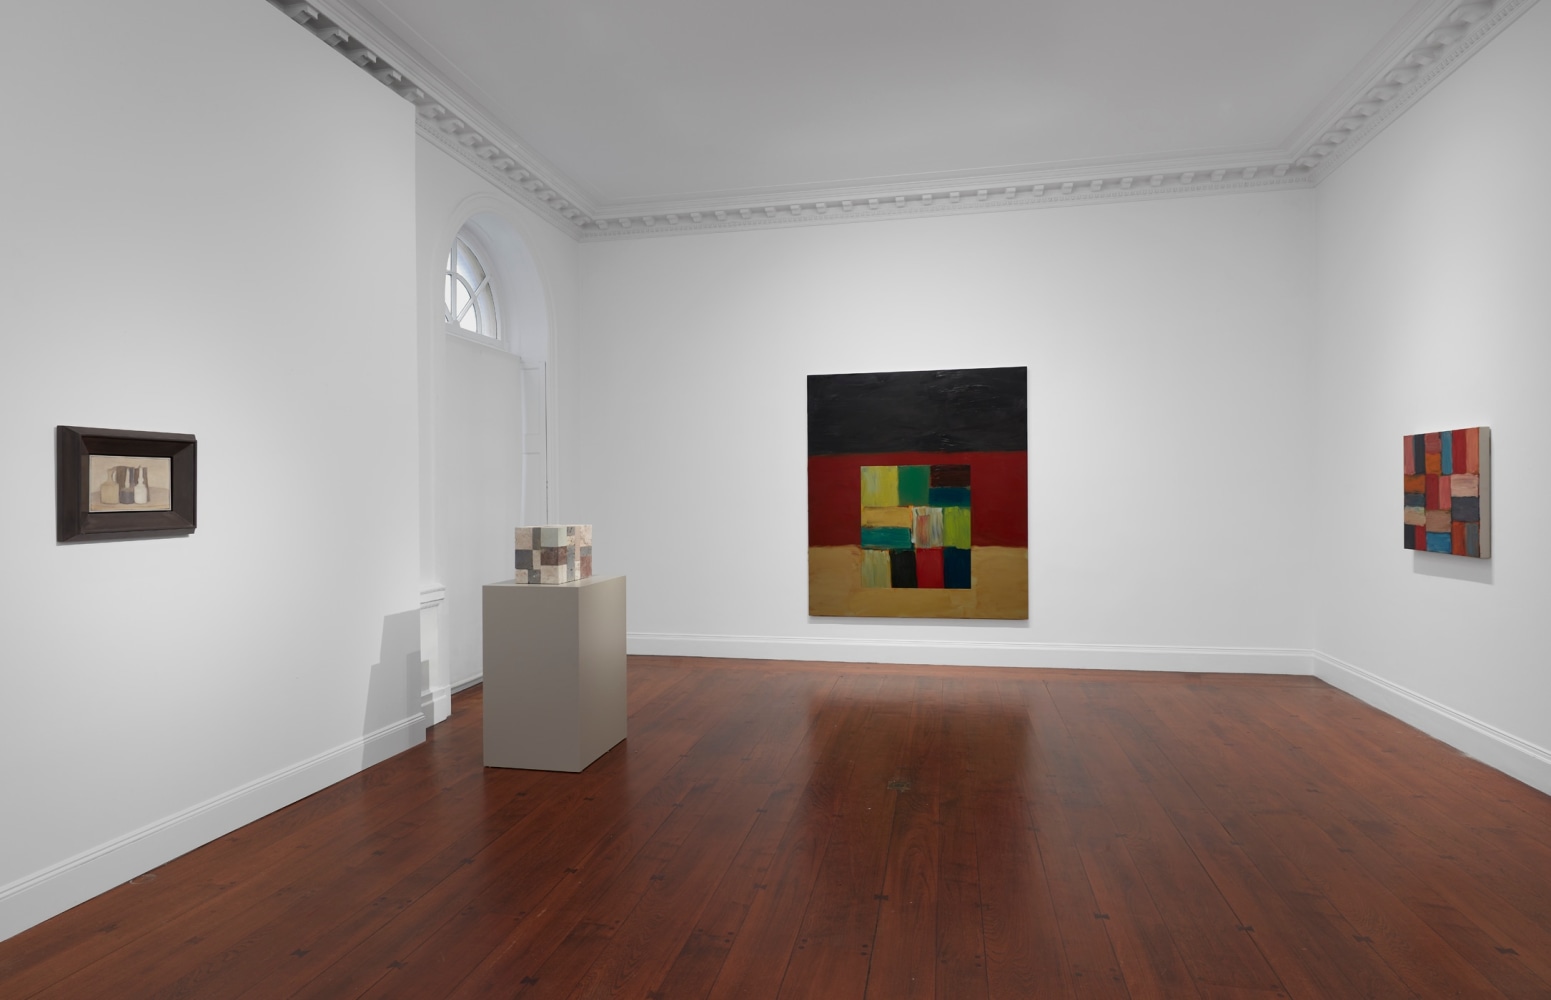 Installation view of Guston/Morandi/Scully, curated by Sukanya Rajaratnam at Mnuchin Gallery, September 8 - October 15, 2022. Photography by Tom Powel Imaging, Inc.